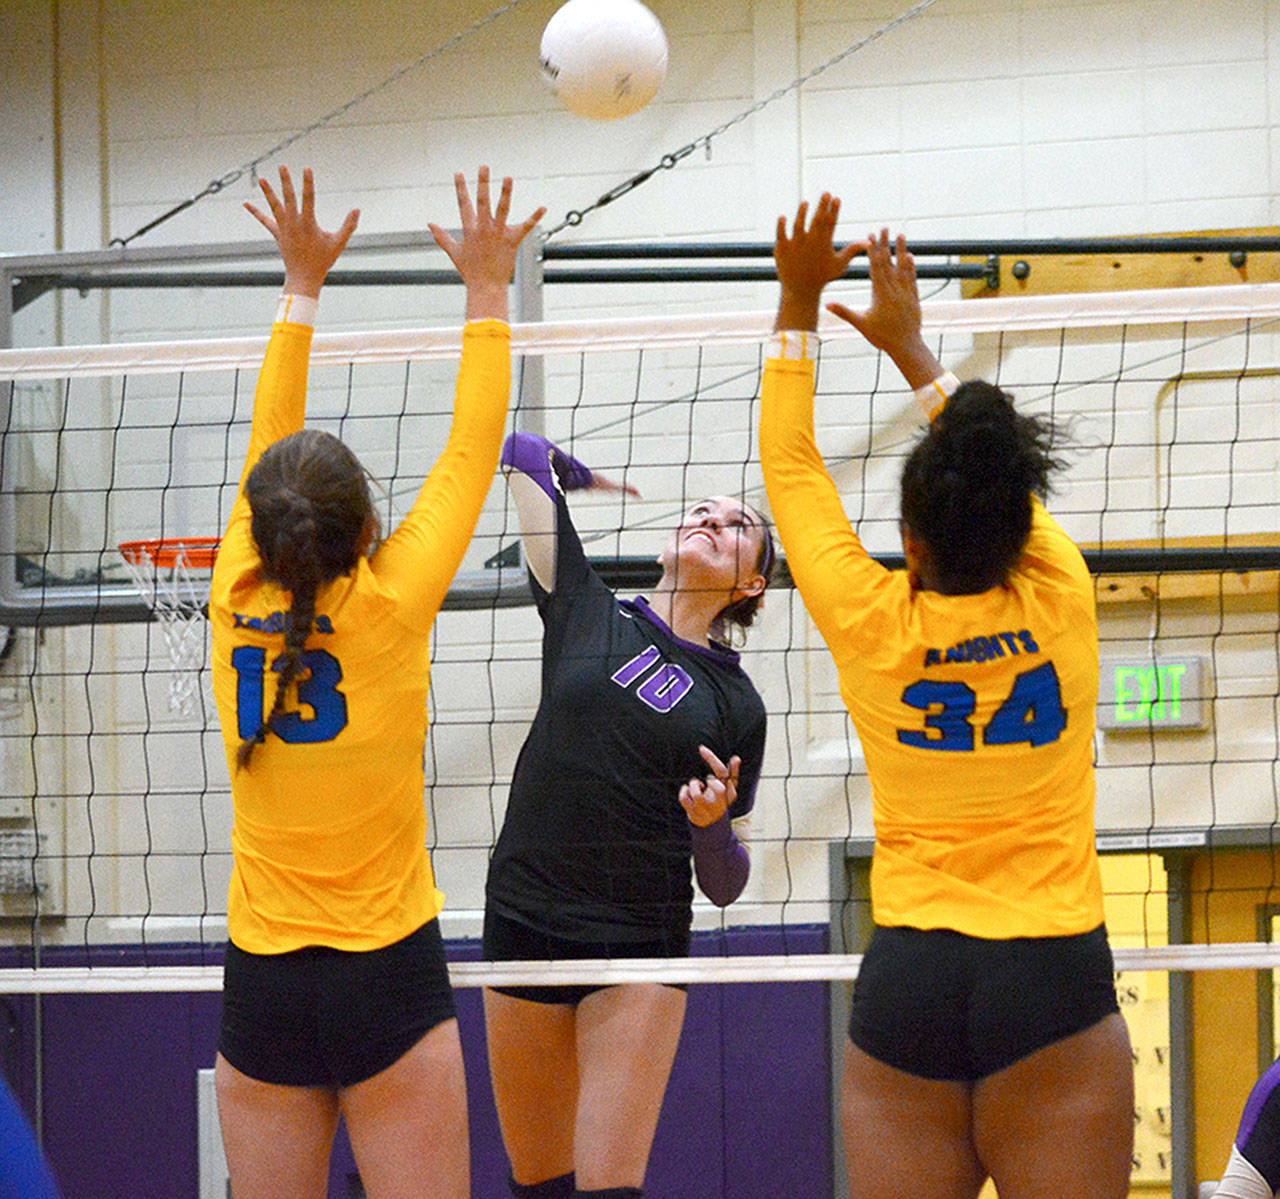 North Kitsap’s Riley Rabedeaux (10) goes up for a spike as Bremerton’s Lily Gelhaus (13) and Adia Anderson (34) try to block the scoring attempt.                                Mark Krulish/Kitsap News Group